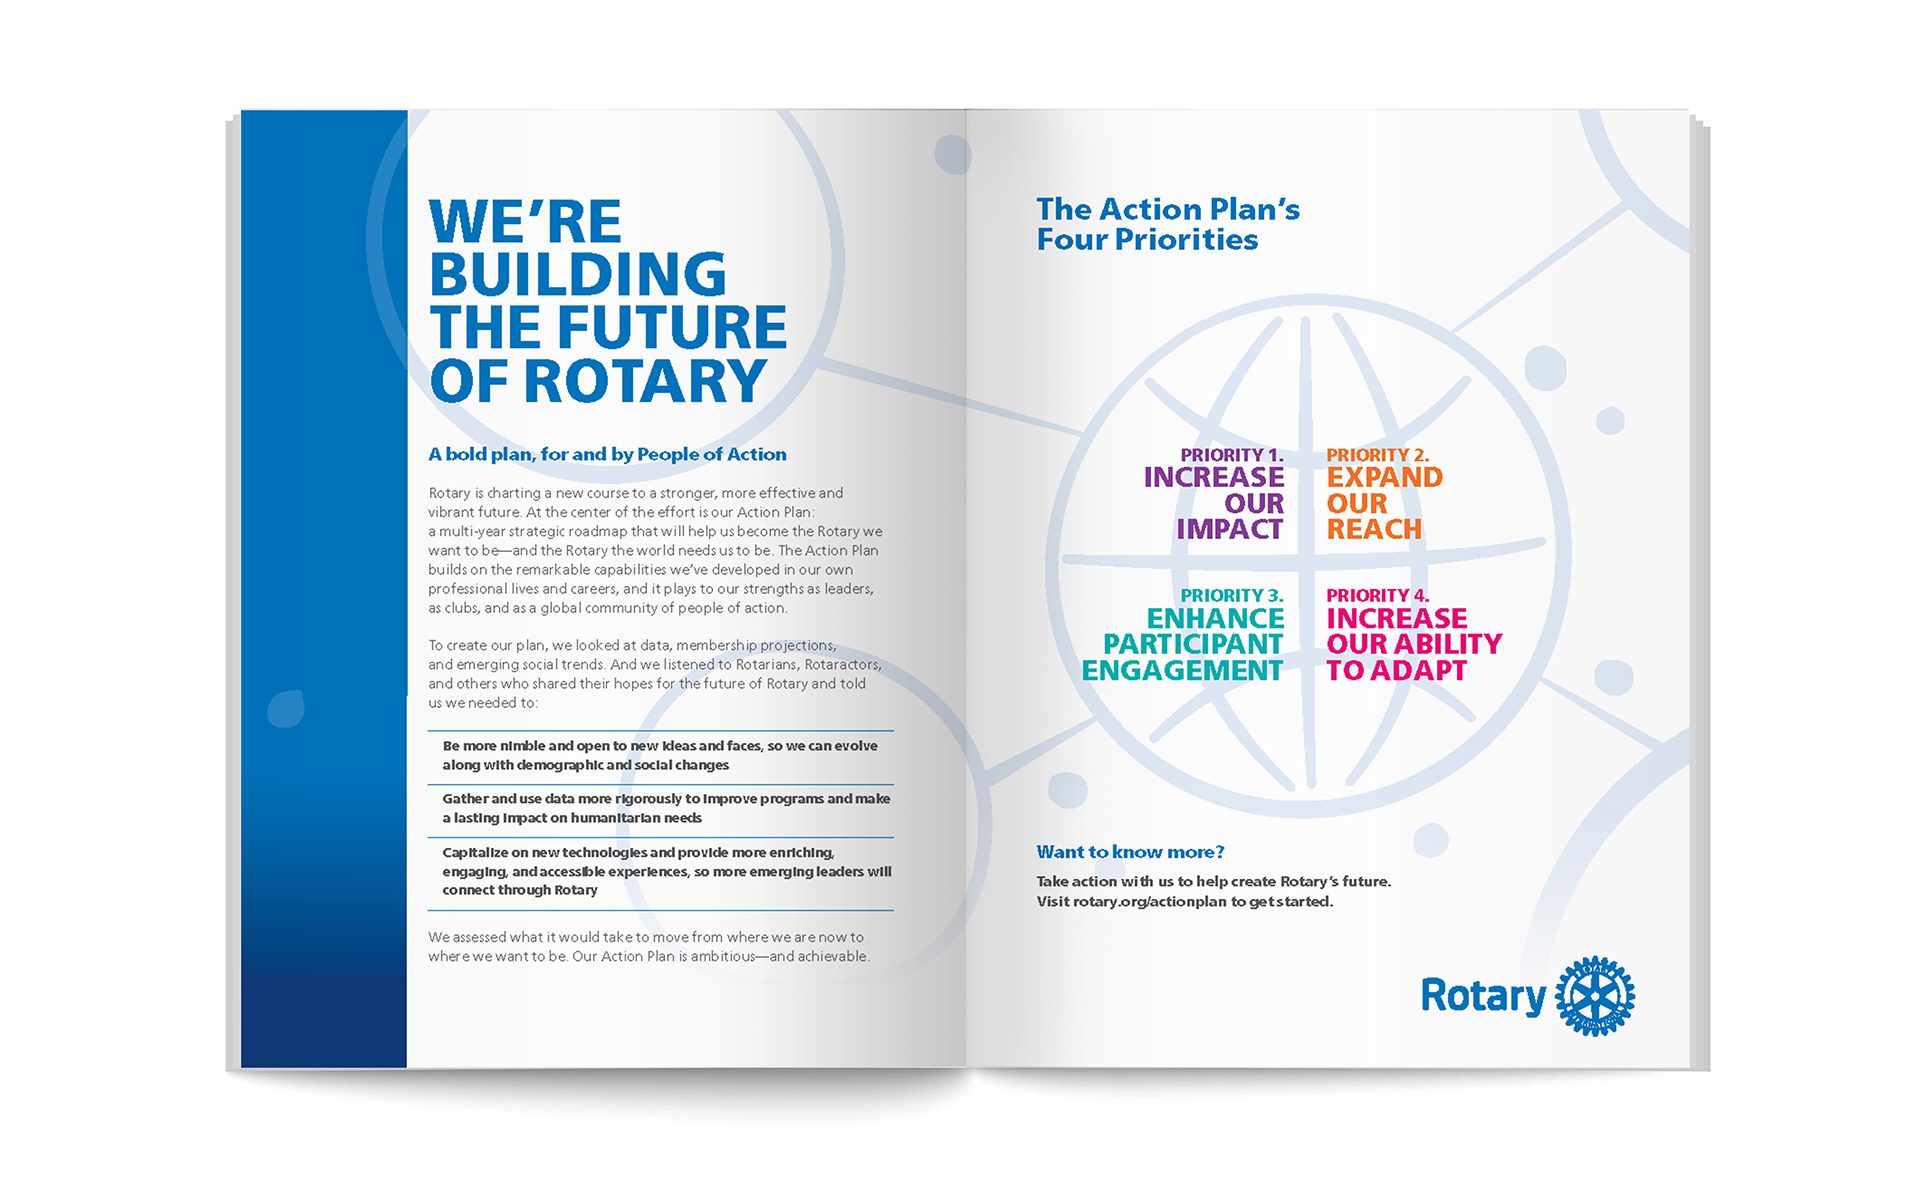 We're building the future of Rotary.